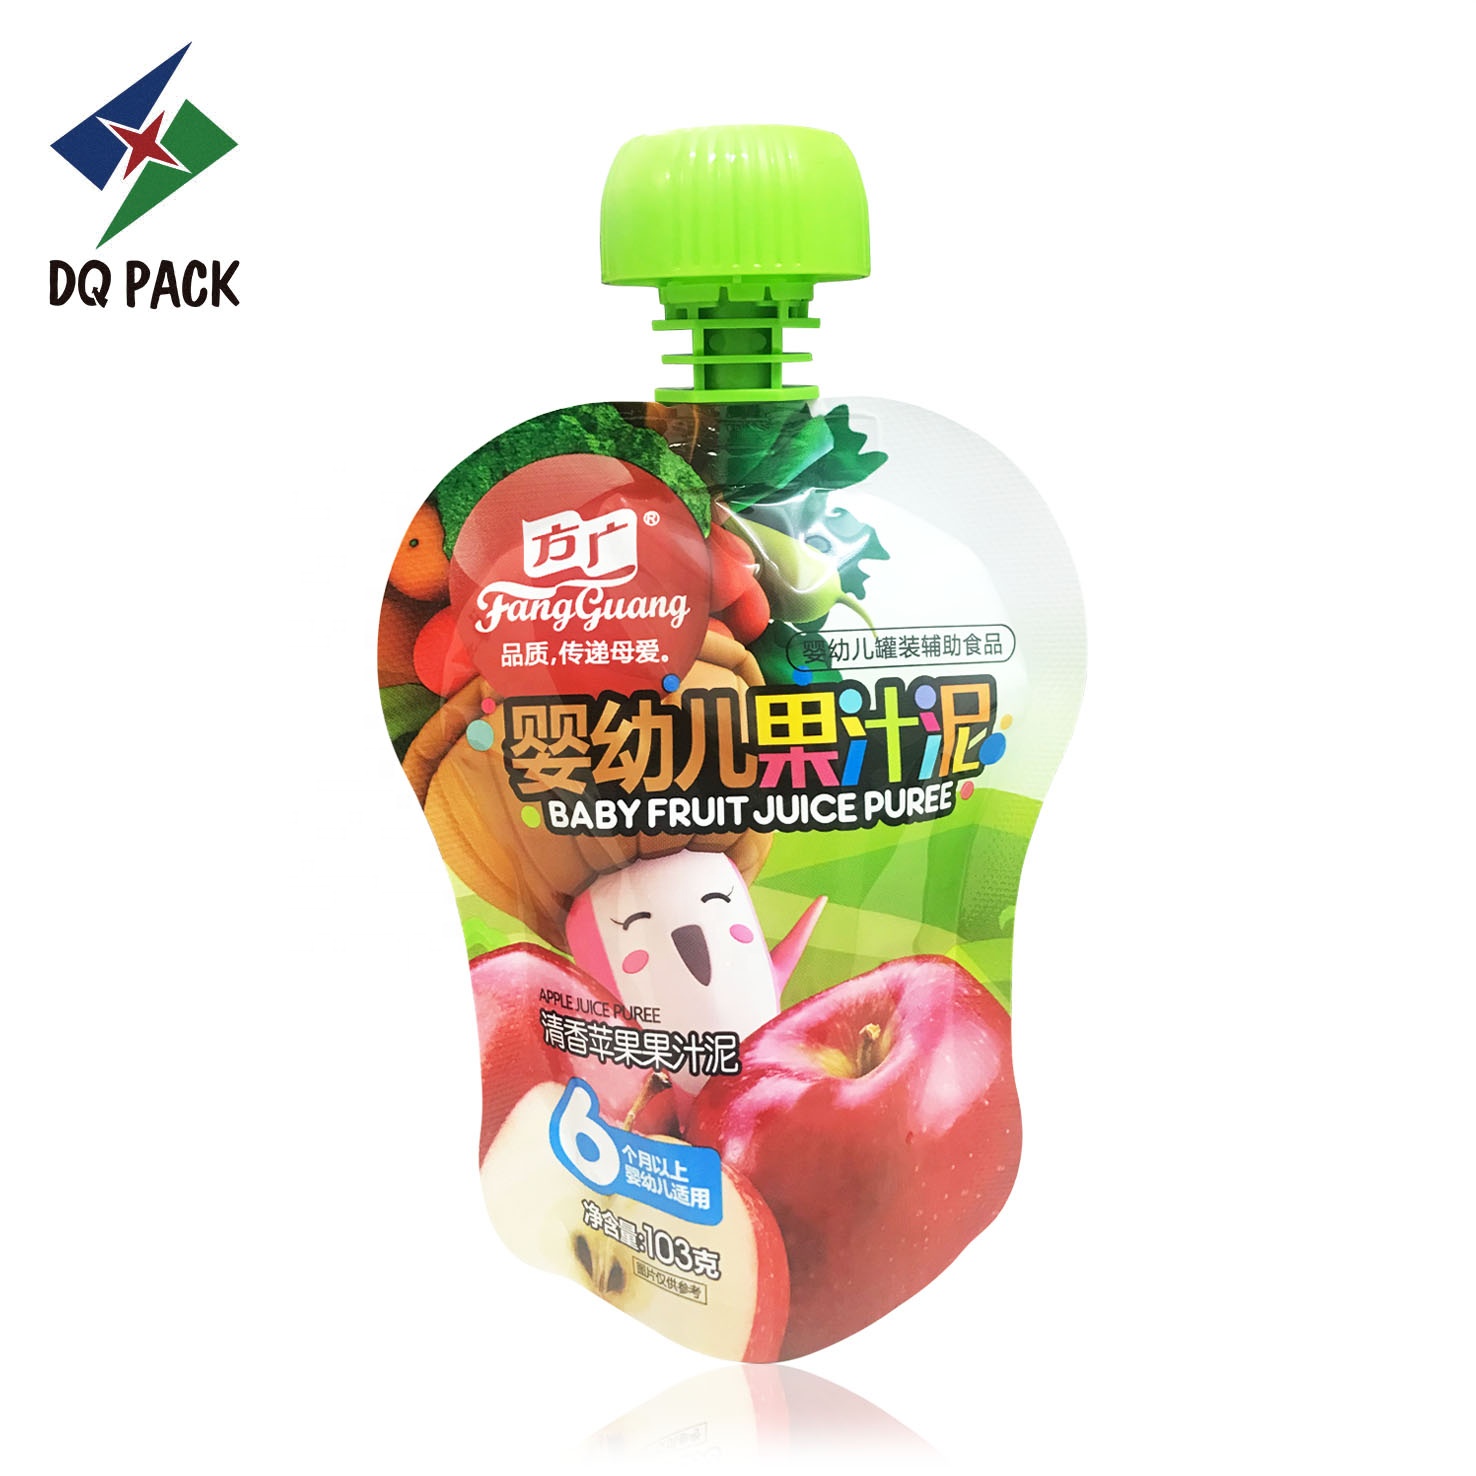 Custom Printed BPA Free Food Grade Plastic Stand Up Double Zipper Reusable Baby Food Pouch Breast Milk Storage Bags with Spout